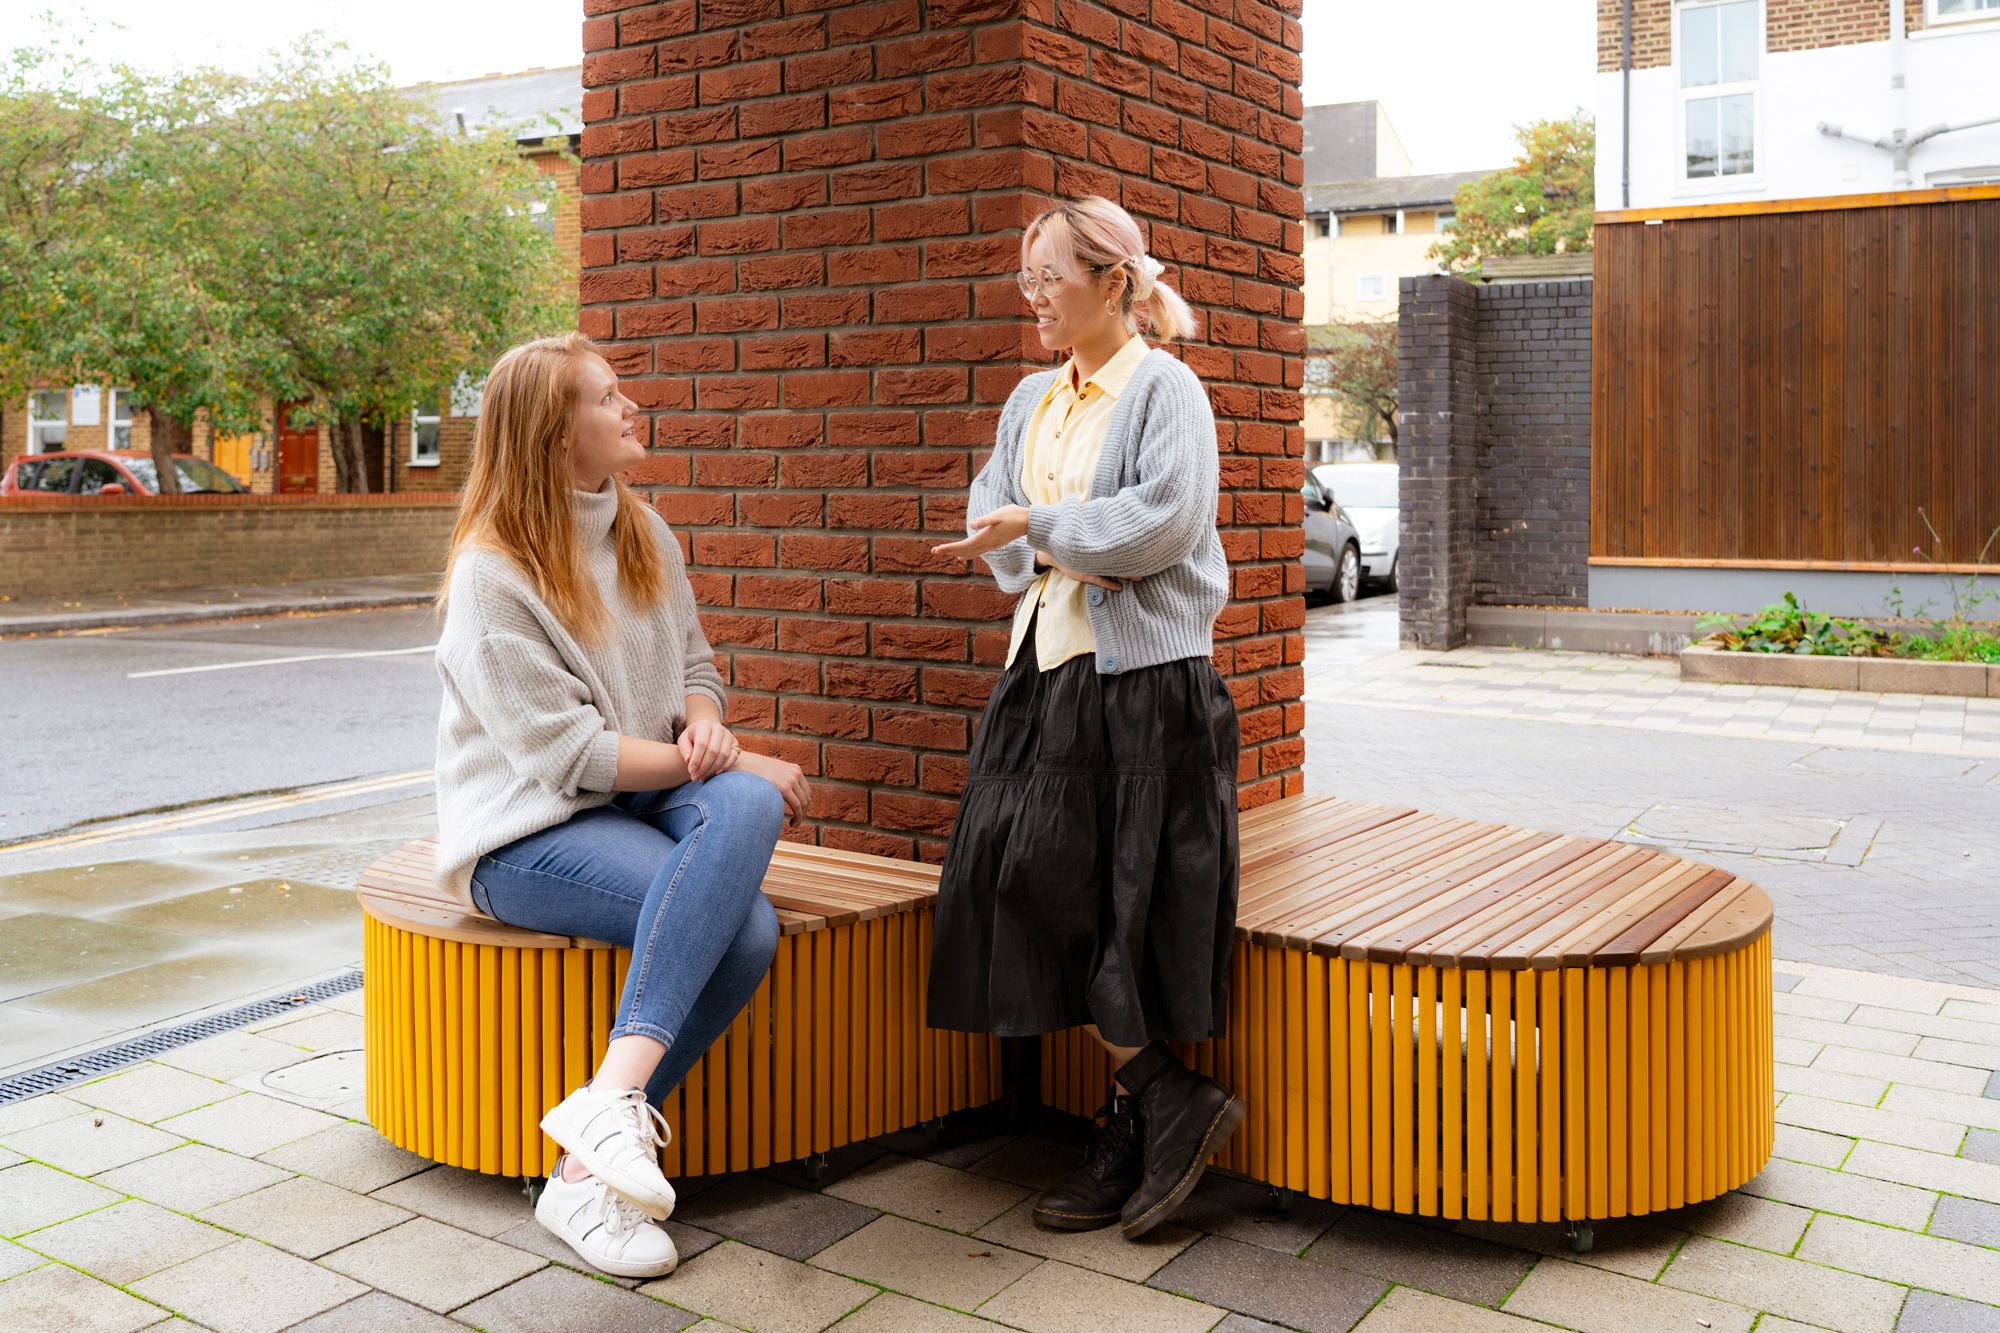 Two woman are talking, one is seated on a bench while the other is leaning against a brick wall